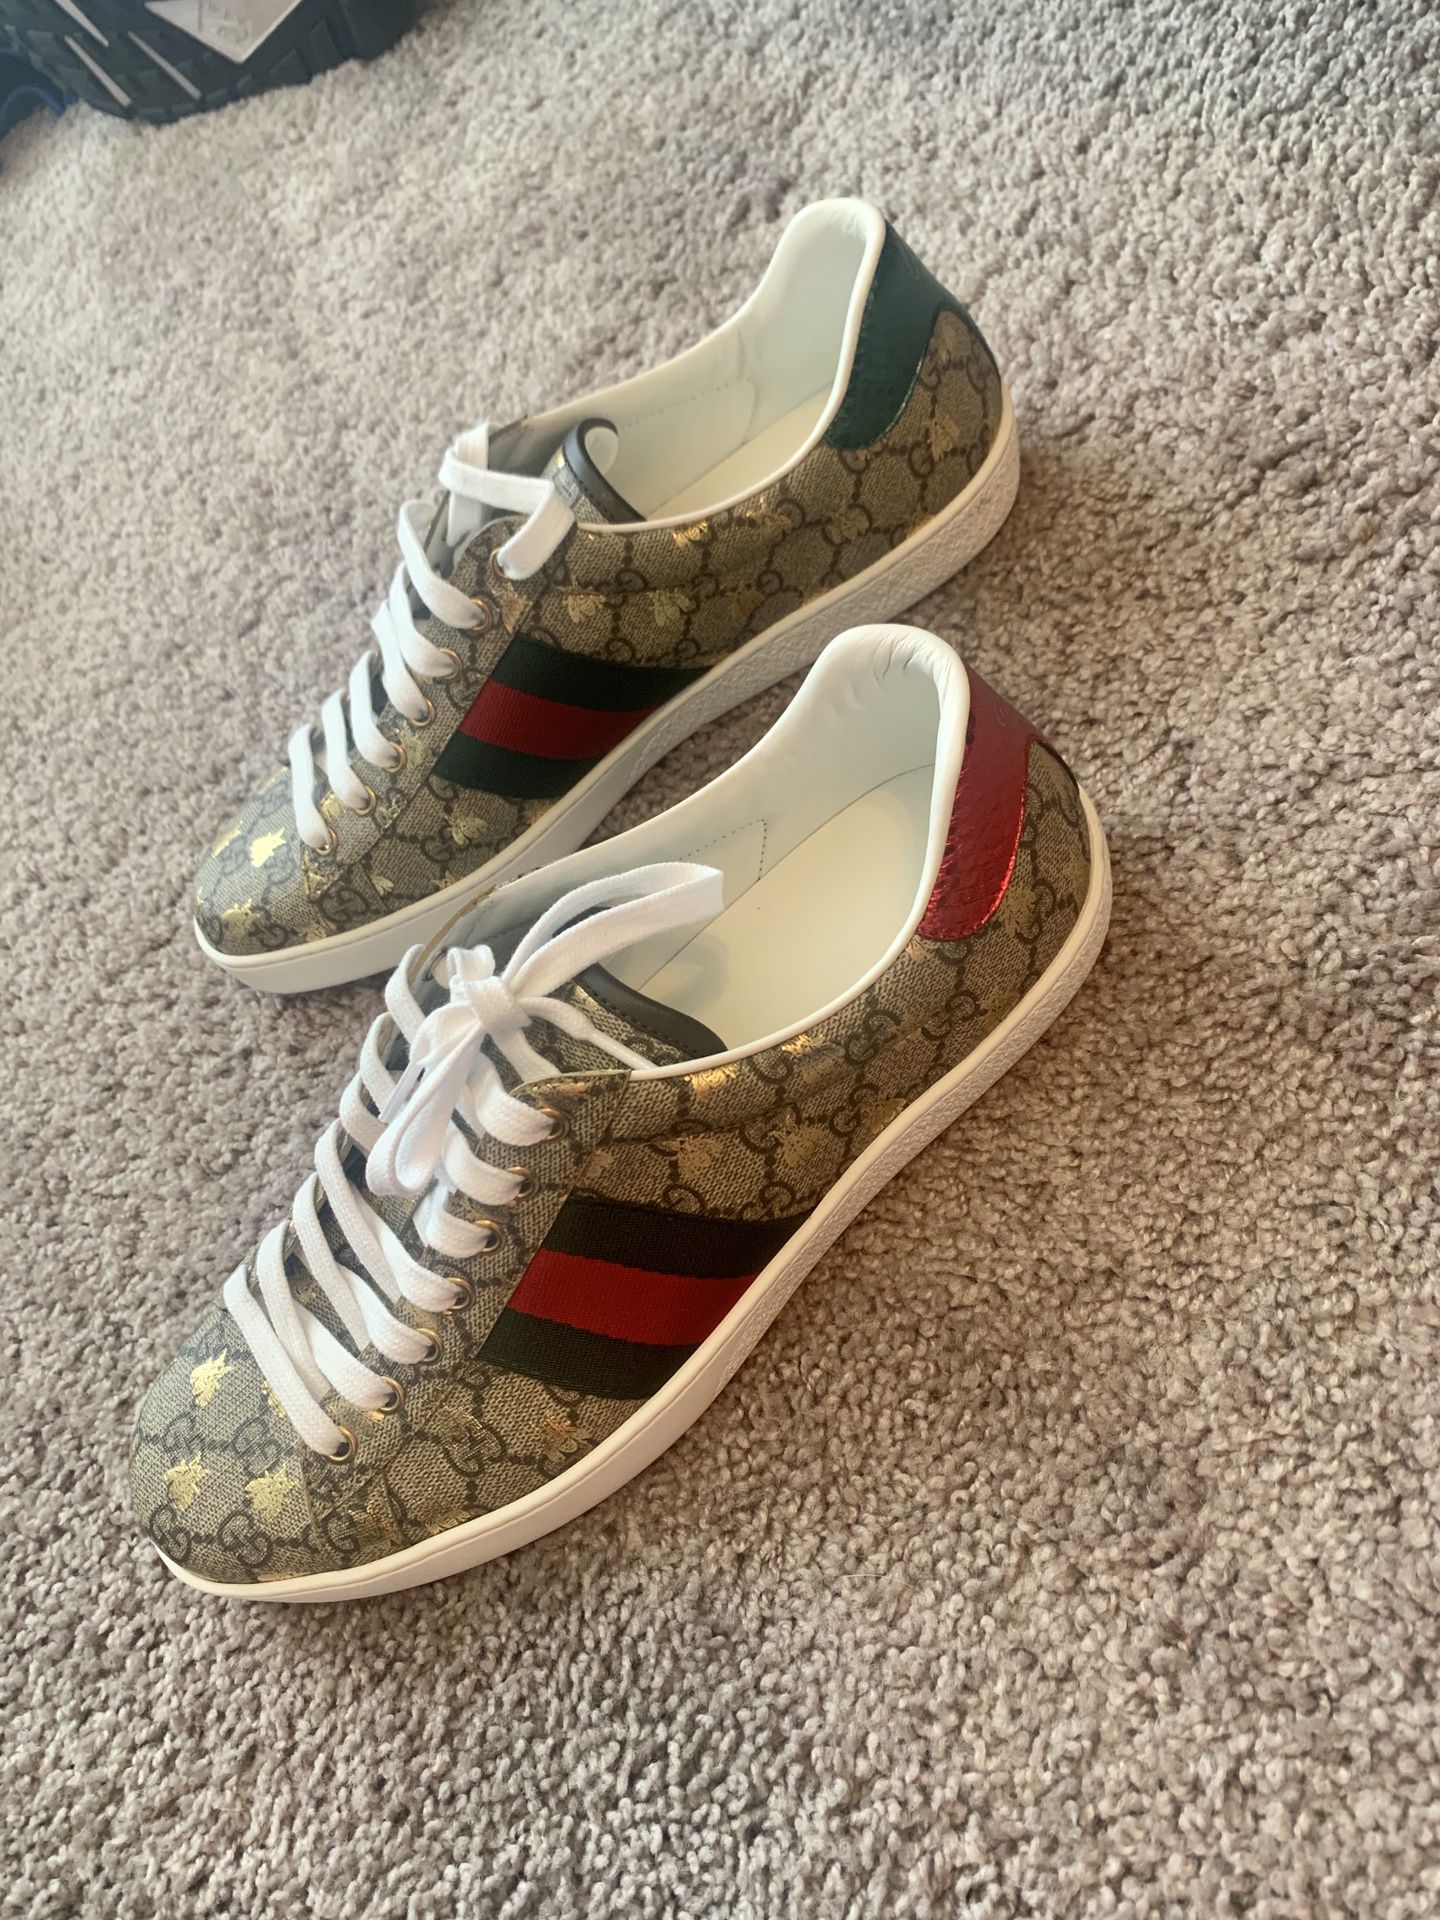 Gucci sneakers never worn